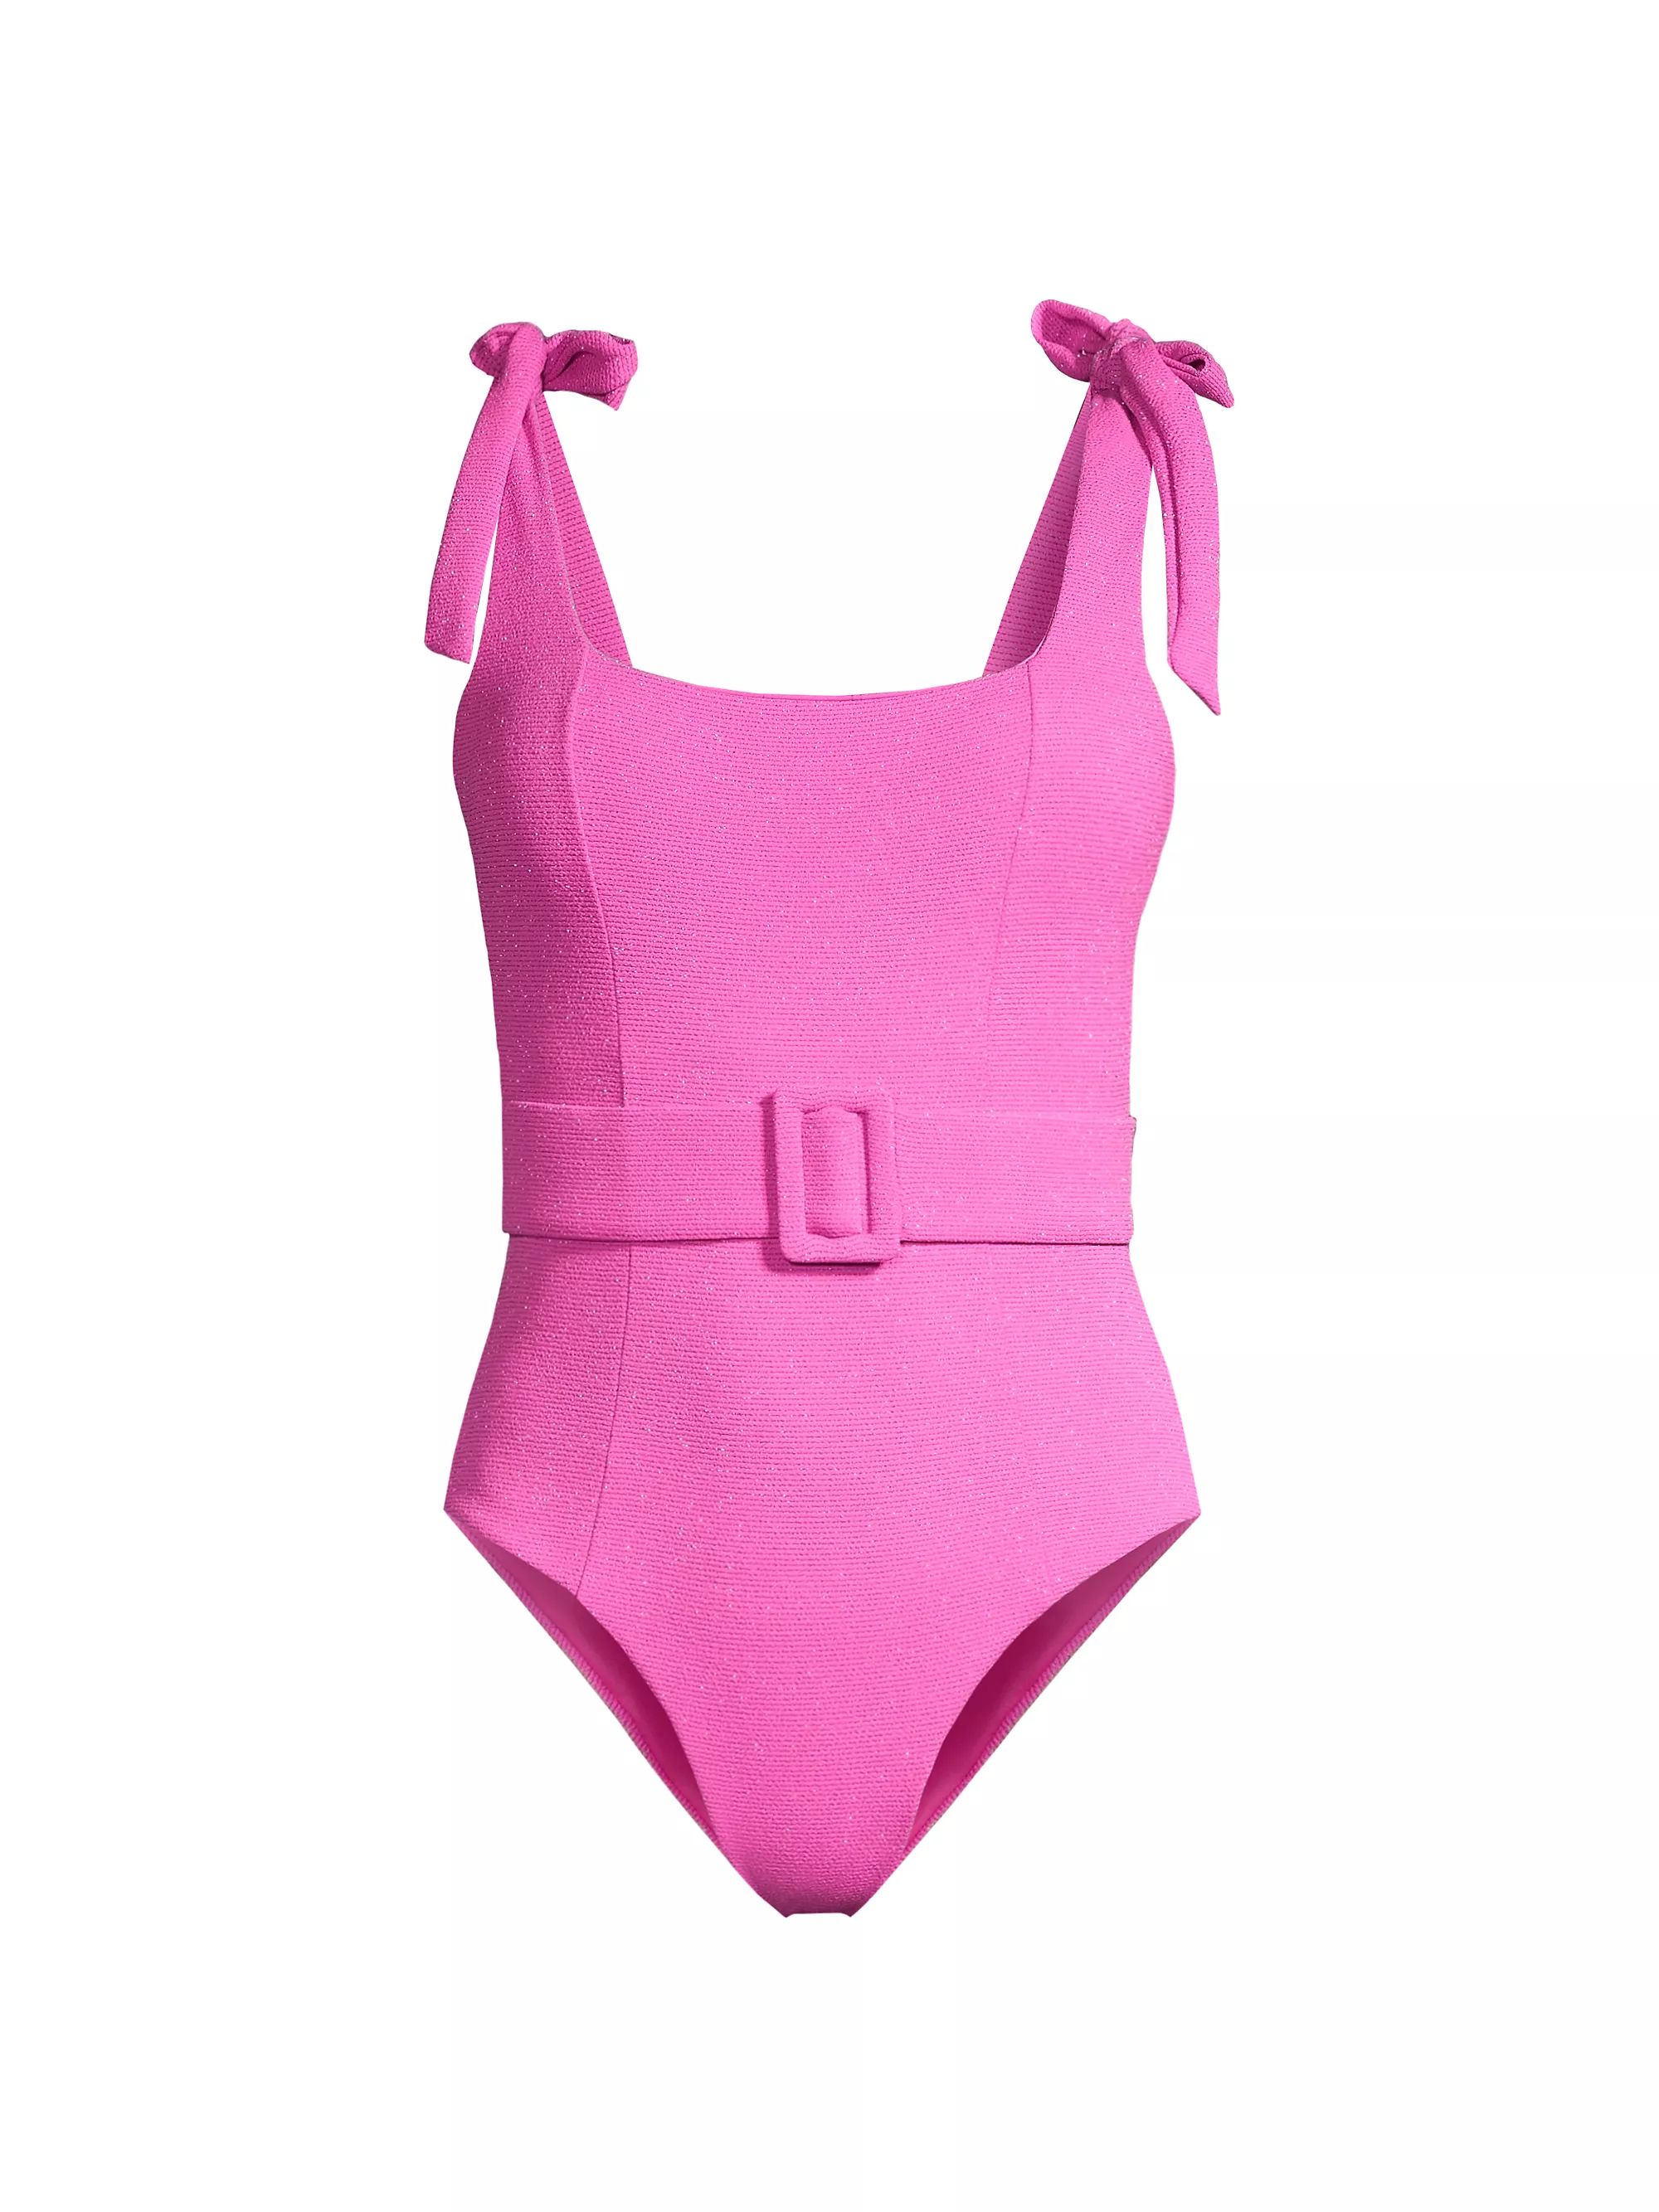 Sydney Belted One-Piece Swimsuit | Saks Fifth Avenue